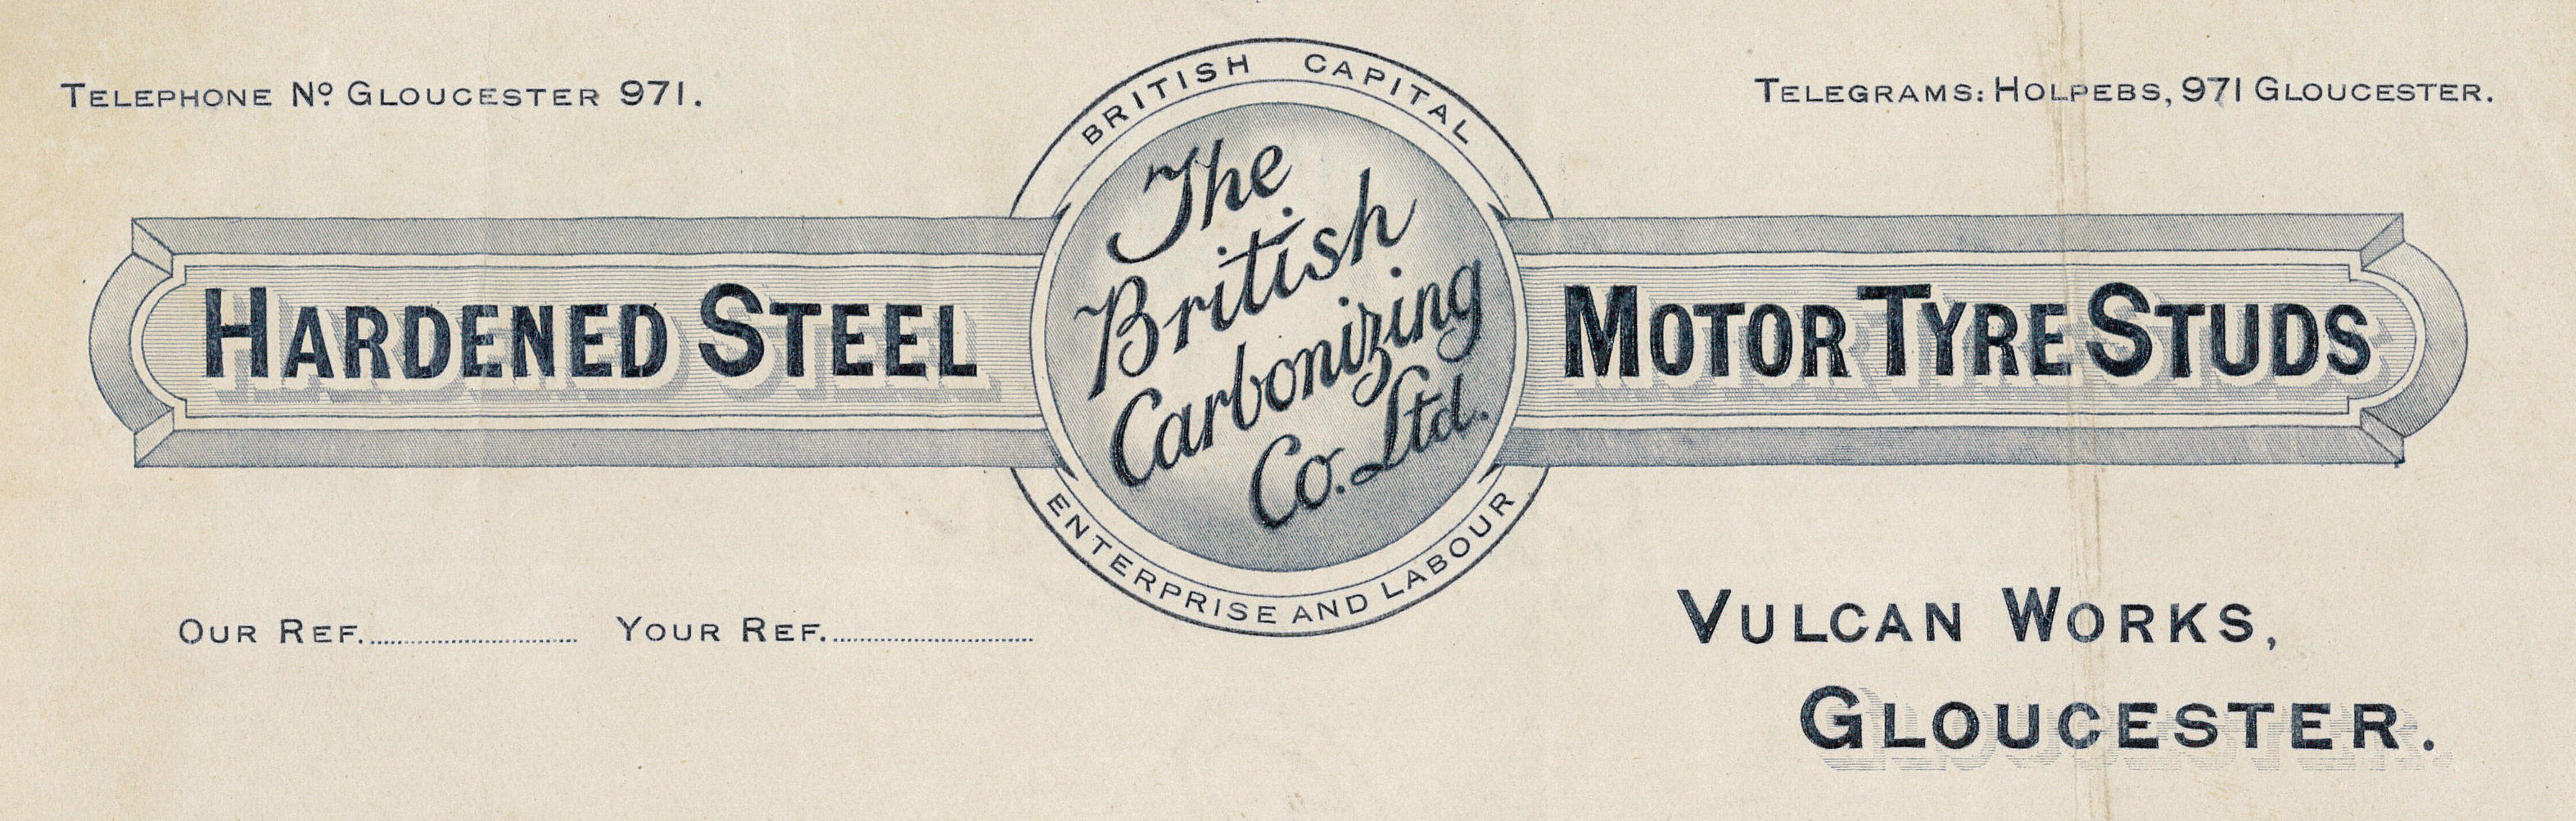 The British Carbonizing Company founded